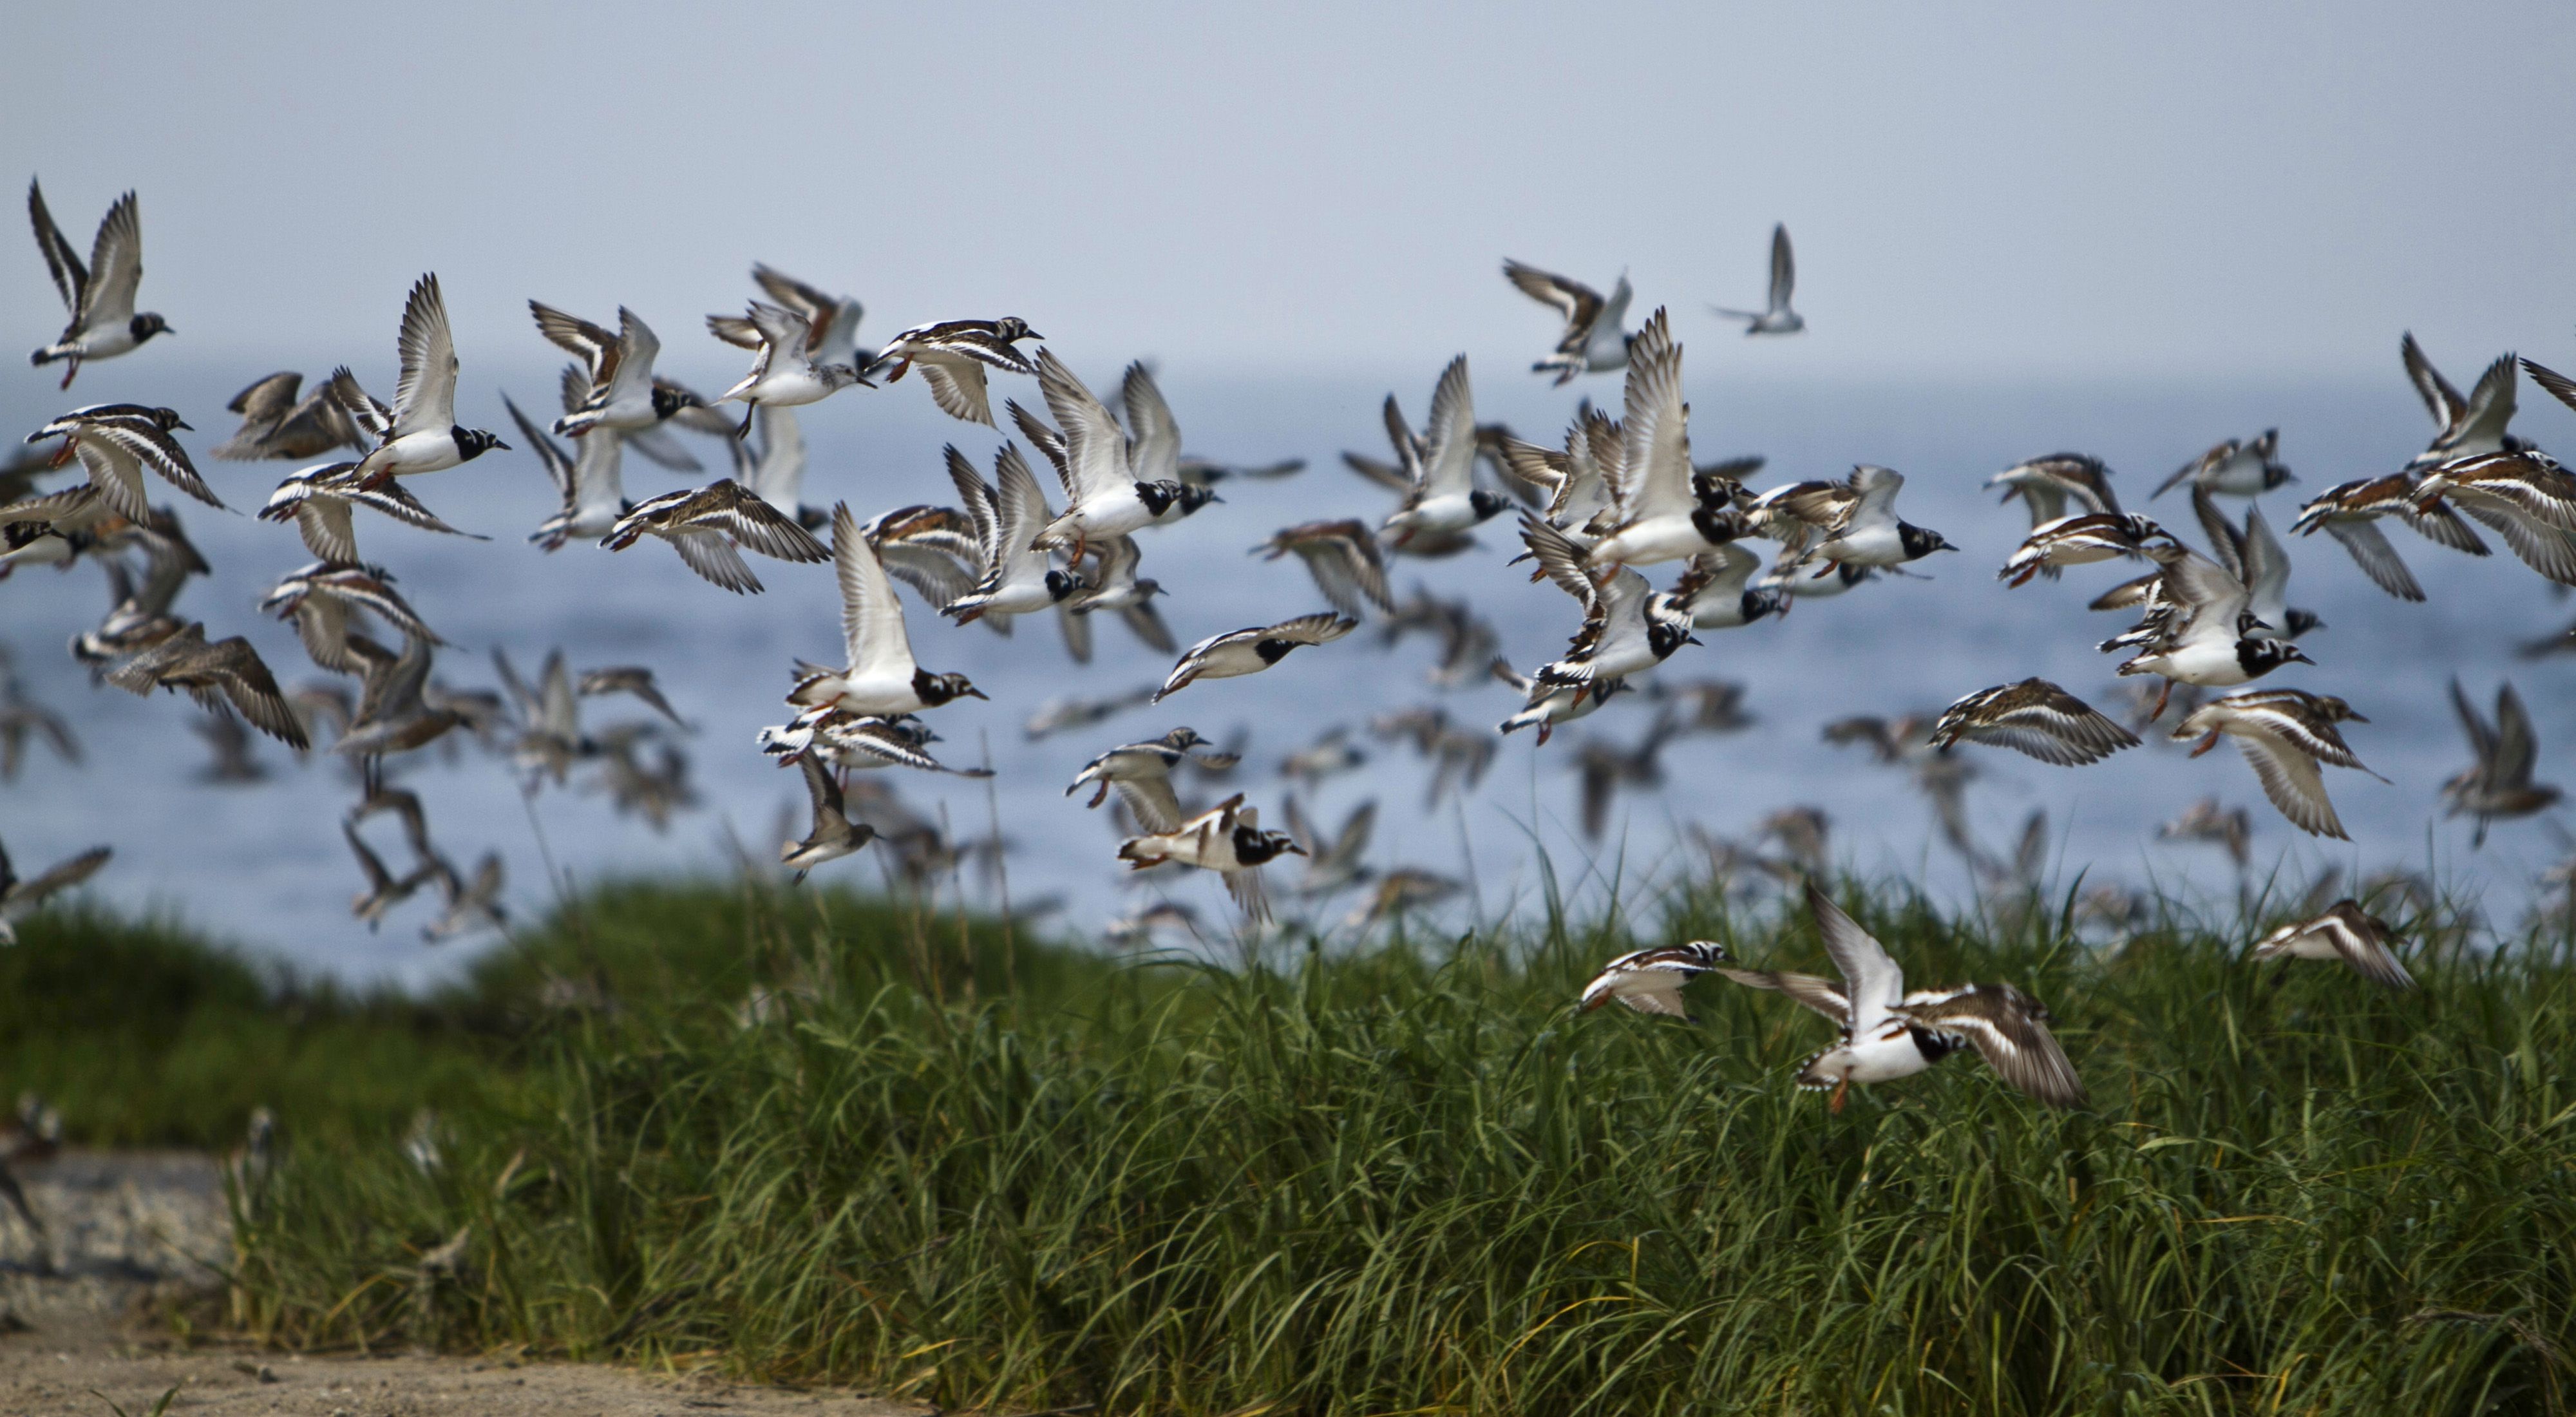 A large group of shorebirds take flight over the grassy area near a beach with the ocean in the distance.